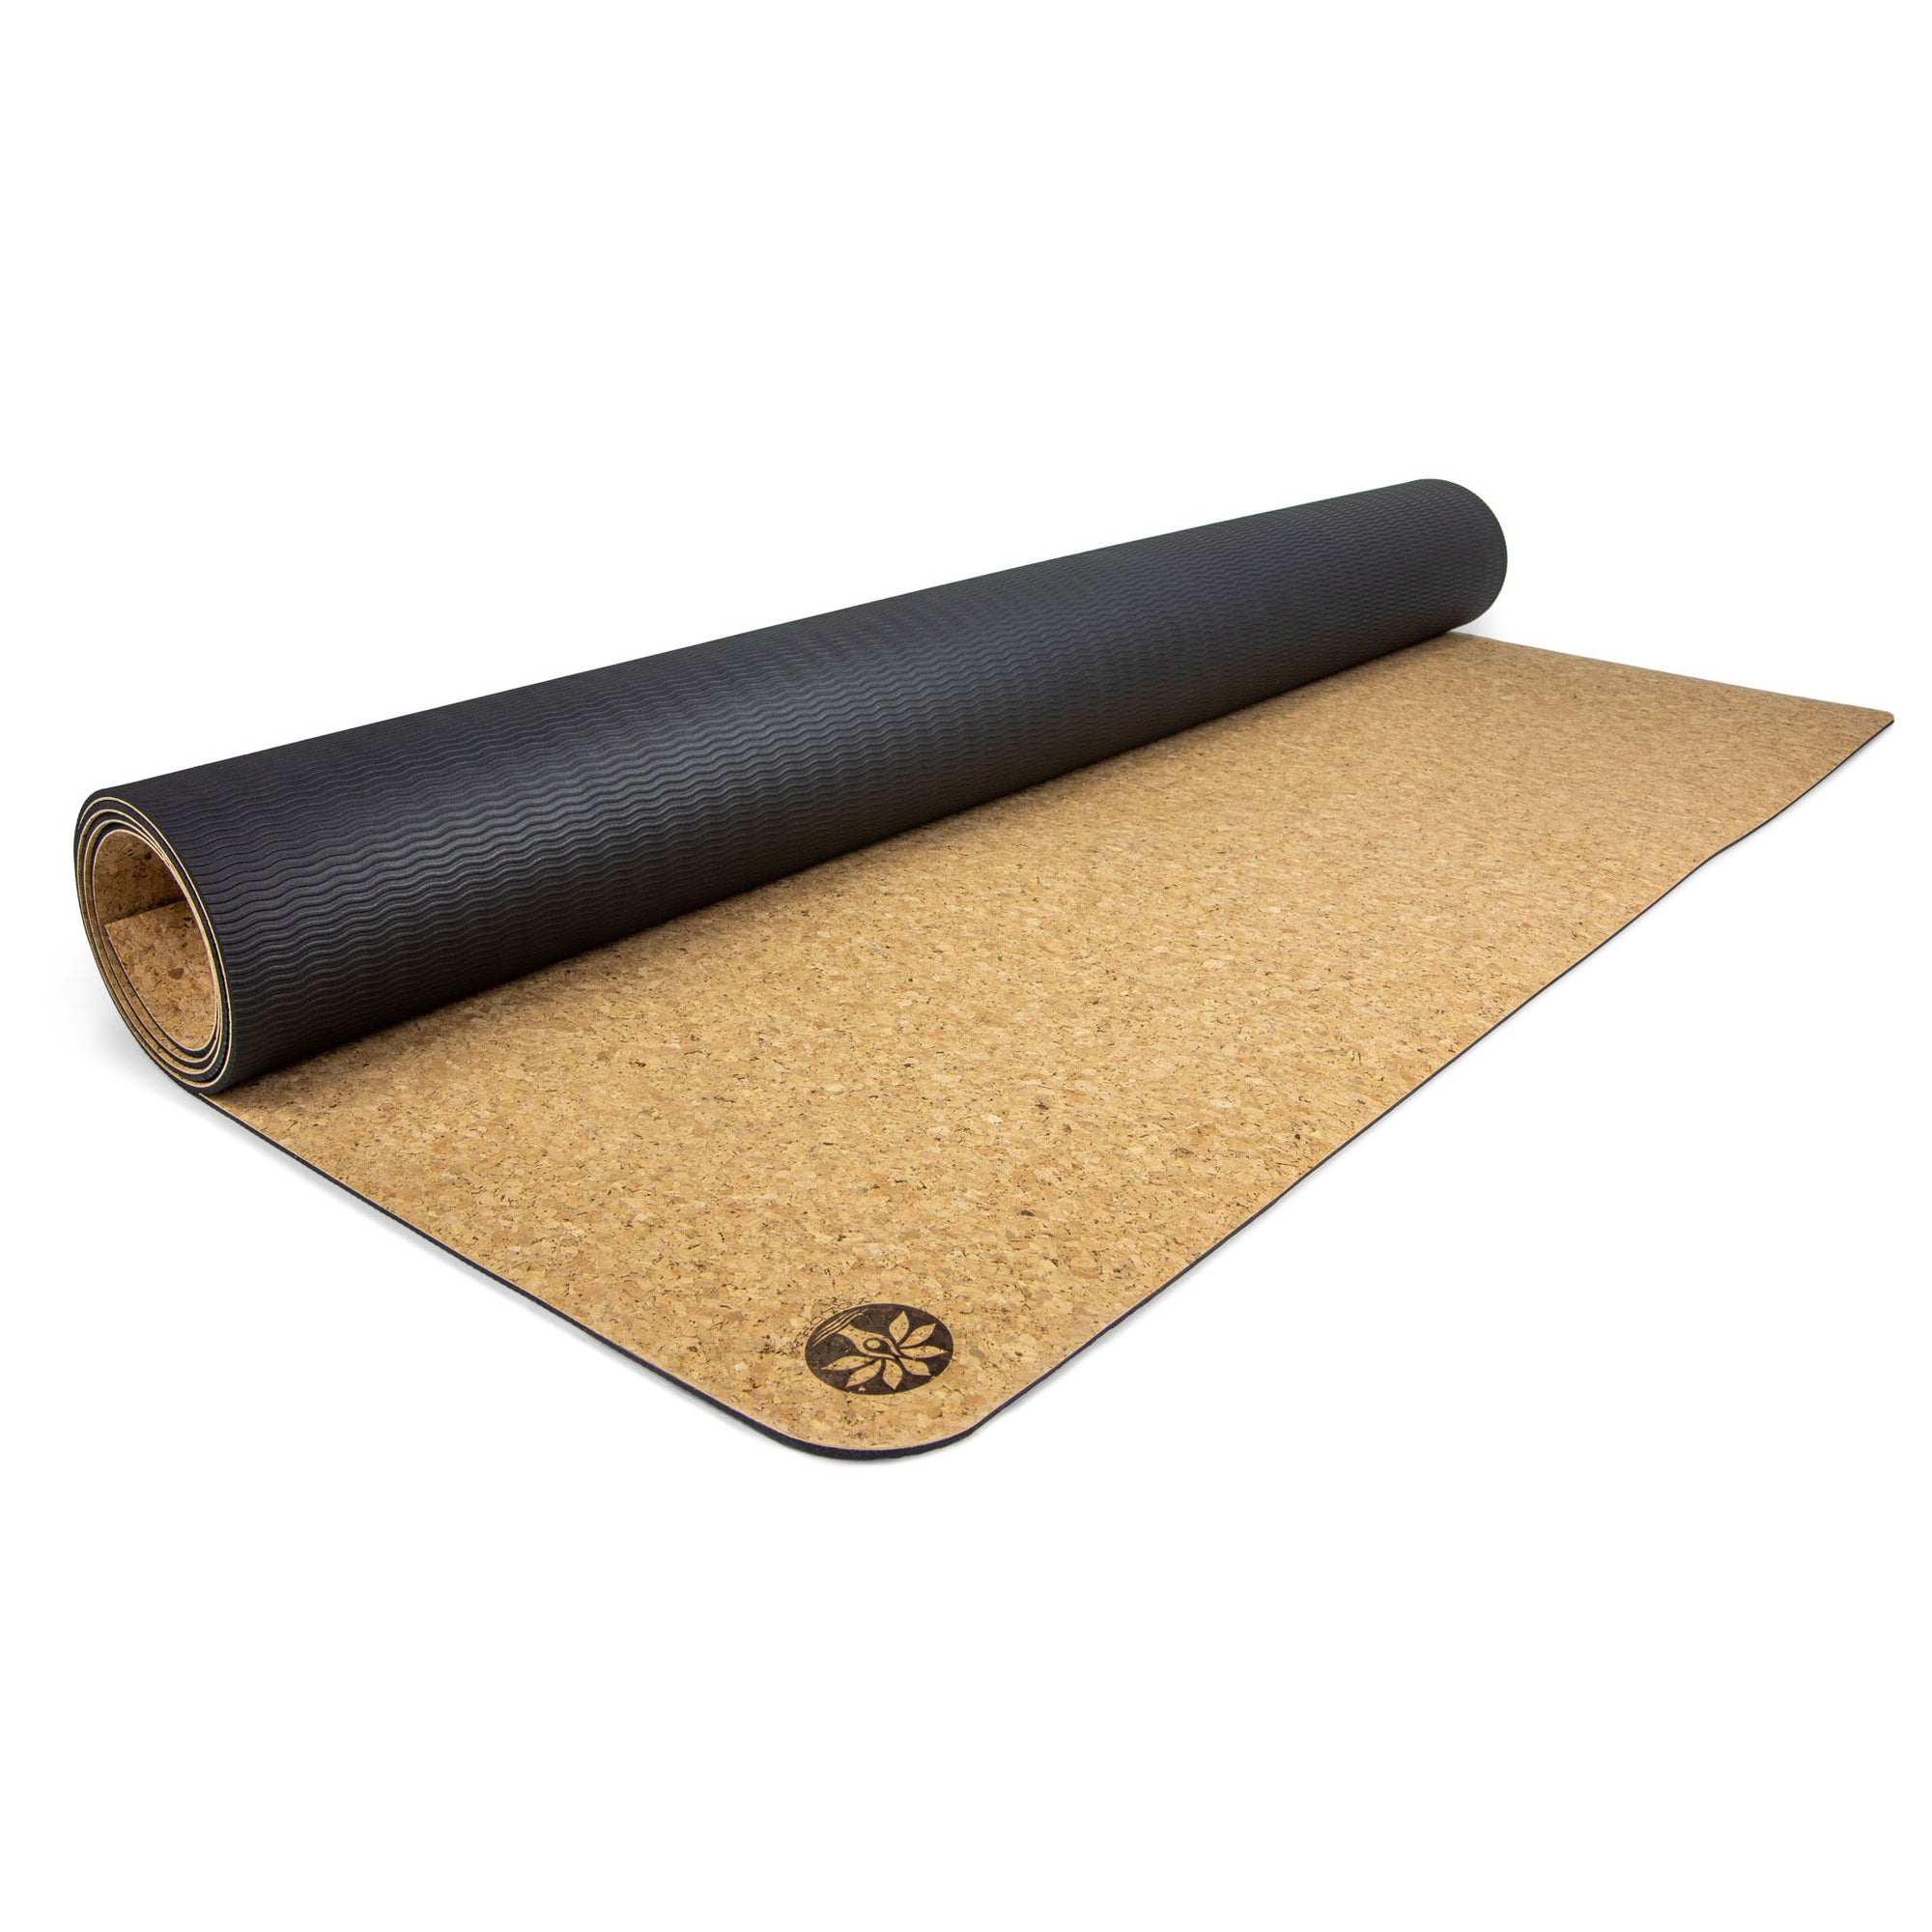 Buy Anti-Skid 6 Feet Long Thick Yoga Mat (Green, 4mm) at Best Price in India